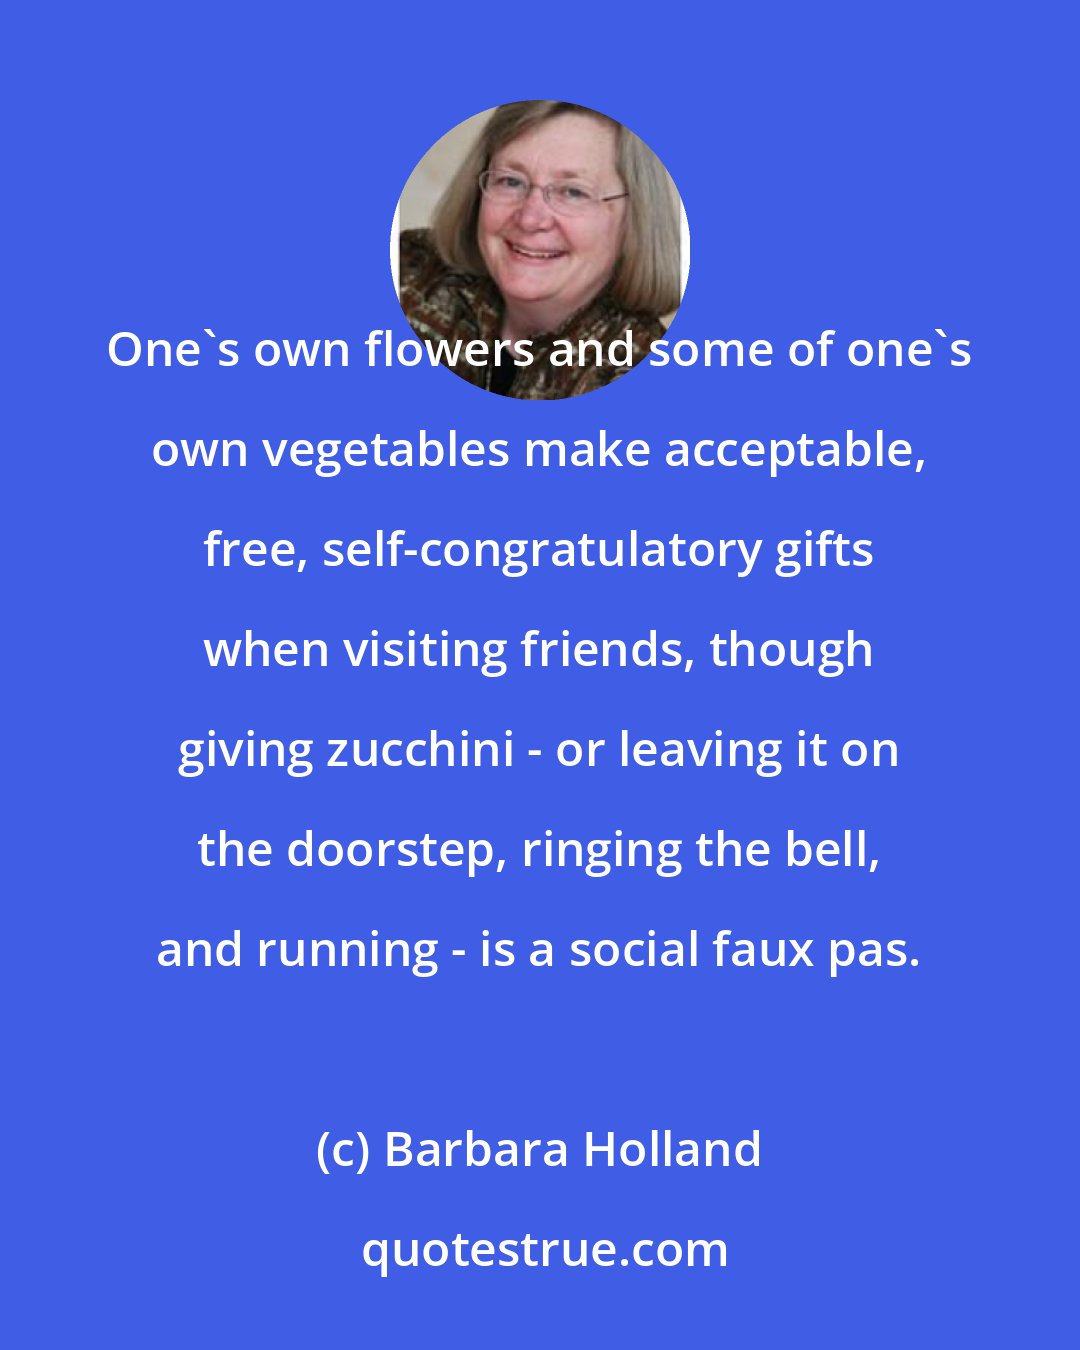 Barbara Holland: One's own flowers and some of one's own vegetables make acceptable, free, self-congratulatory gifts when visiting friends, though giving zucchini - or leaving it on the doorstep, ringing the bell, and running - is a social faux pas.